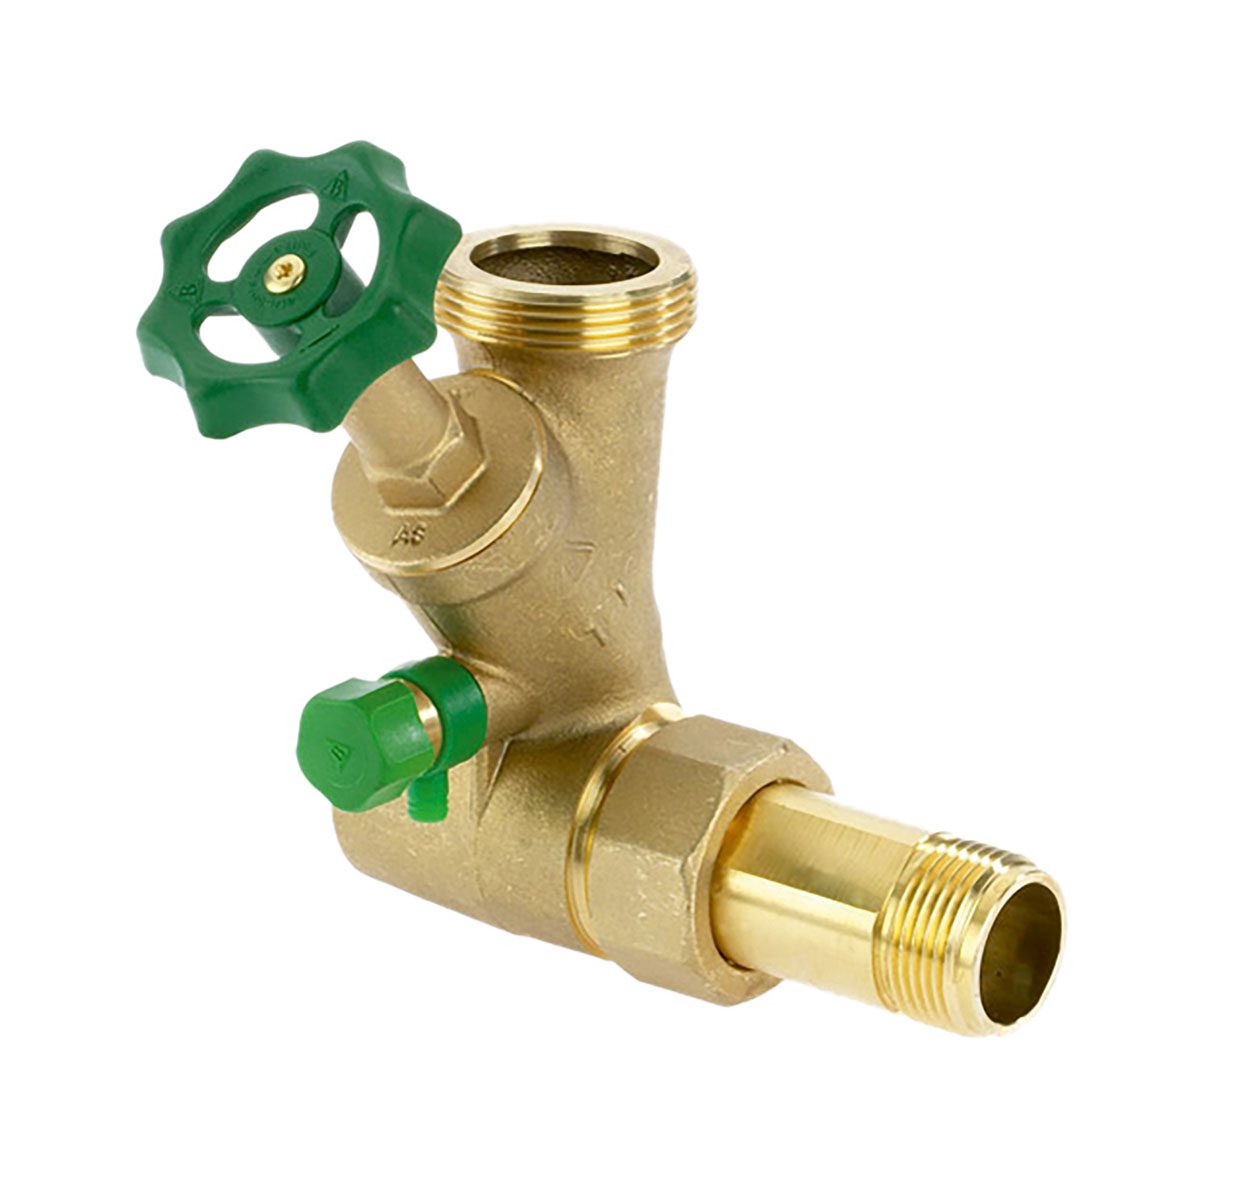 4900000 - CR-Brass Branch T-Valve AT-Fit Free-flow Body DN 25